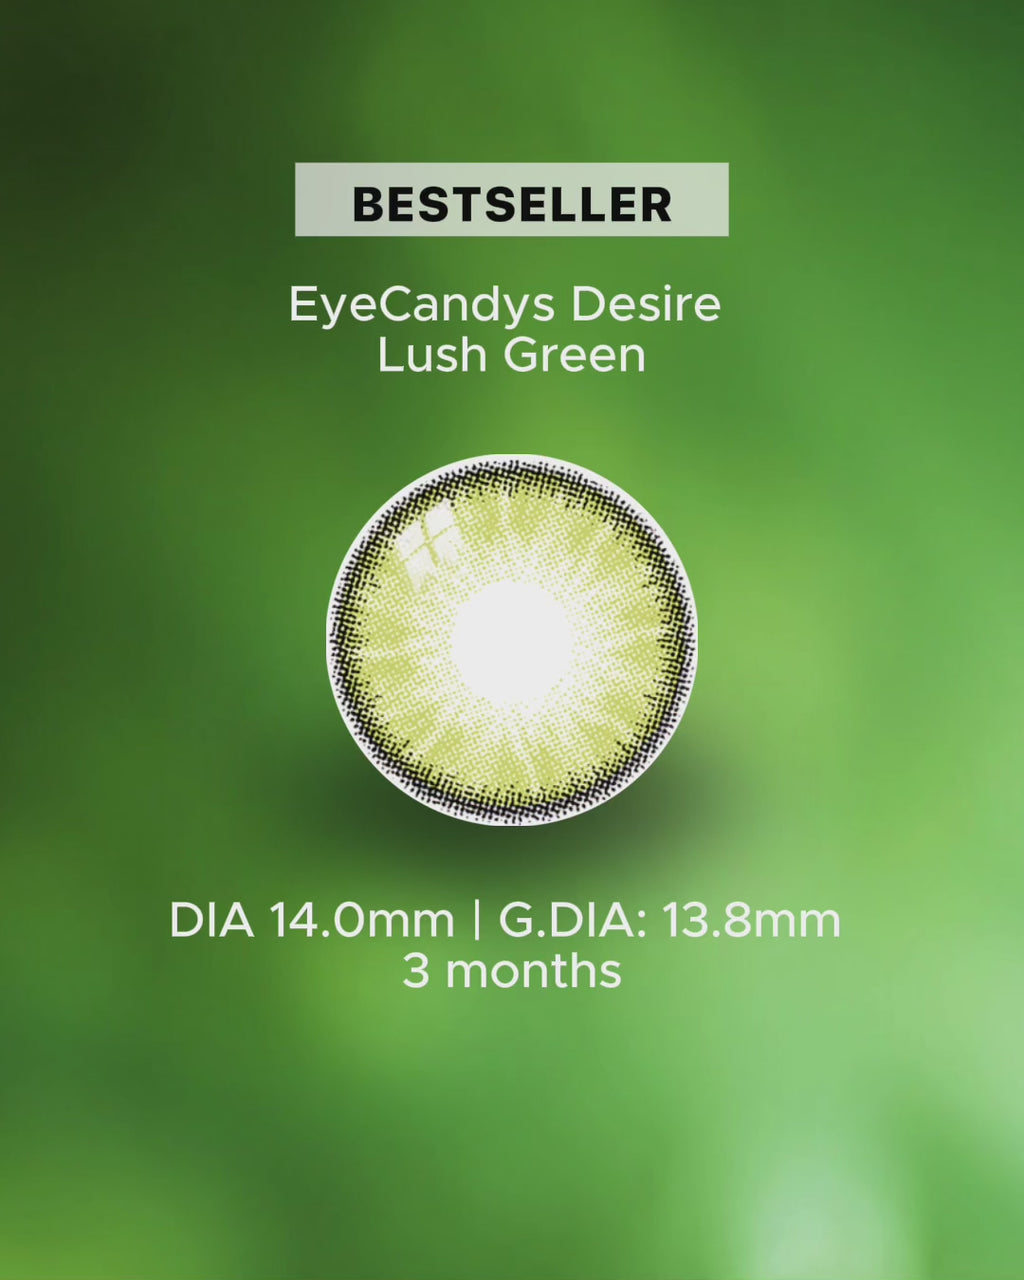 A video of the lens desire lush green rotating in the center with text written below DIA 14.0mm | G. DIA: 13.8MM | 3 months duration. On the later part of the video, a model of a woman with natural brown eye in close up eye shot wearing the desire lush green contacts 